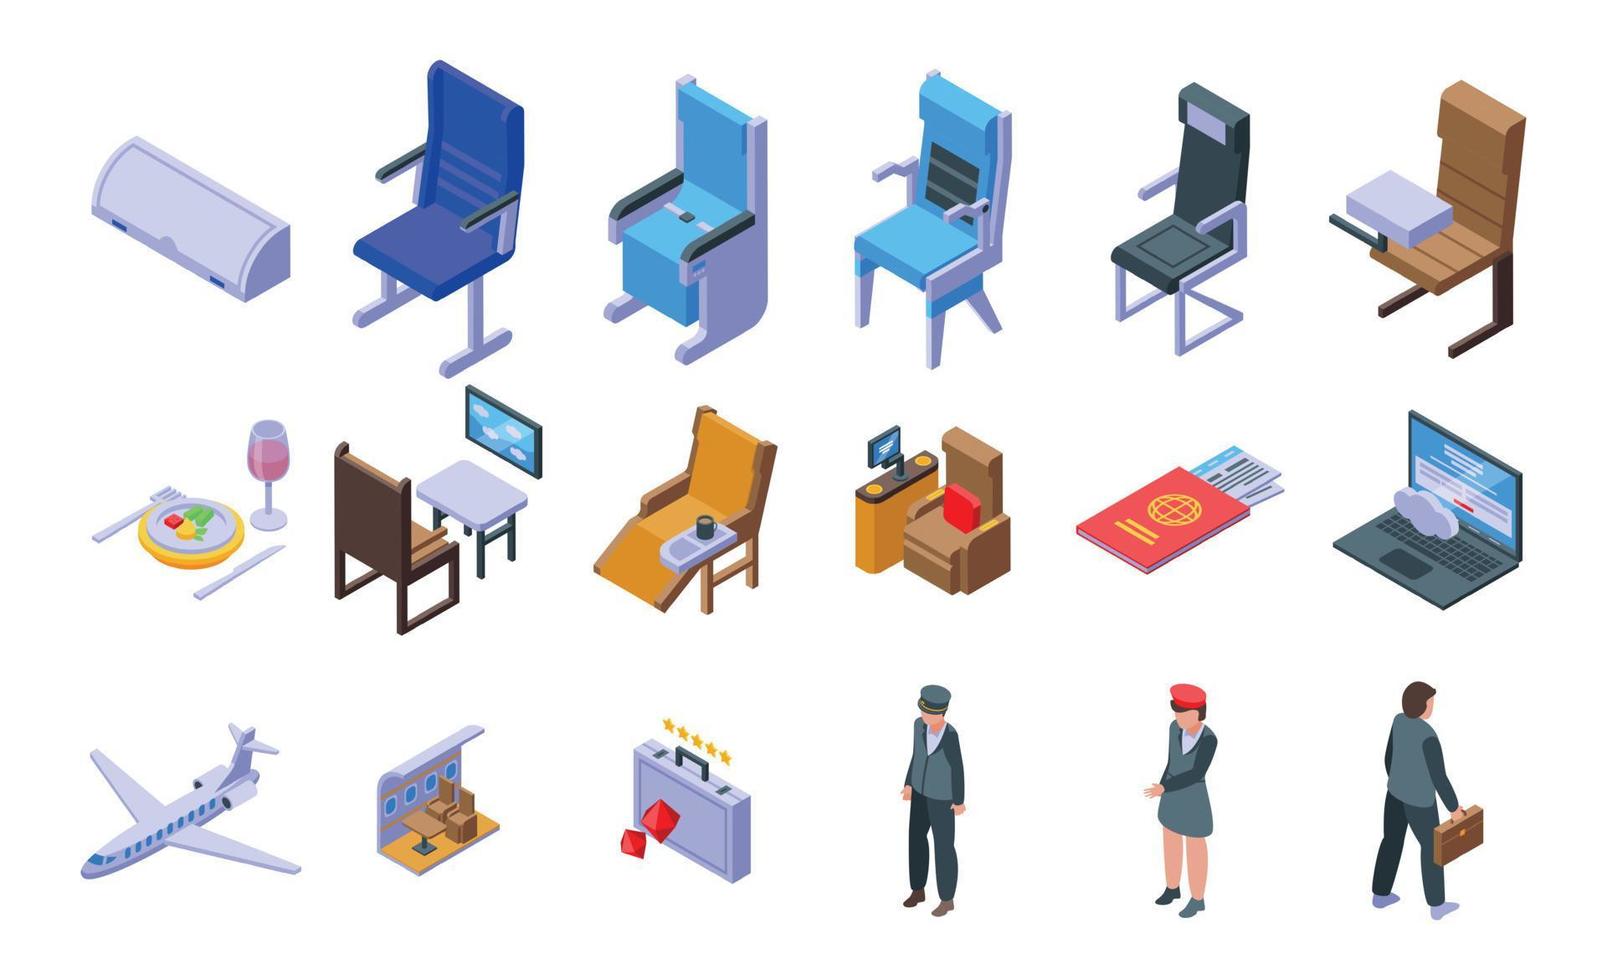 First class travel icons set, isometric style vector